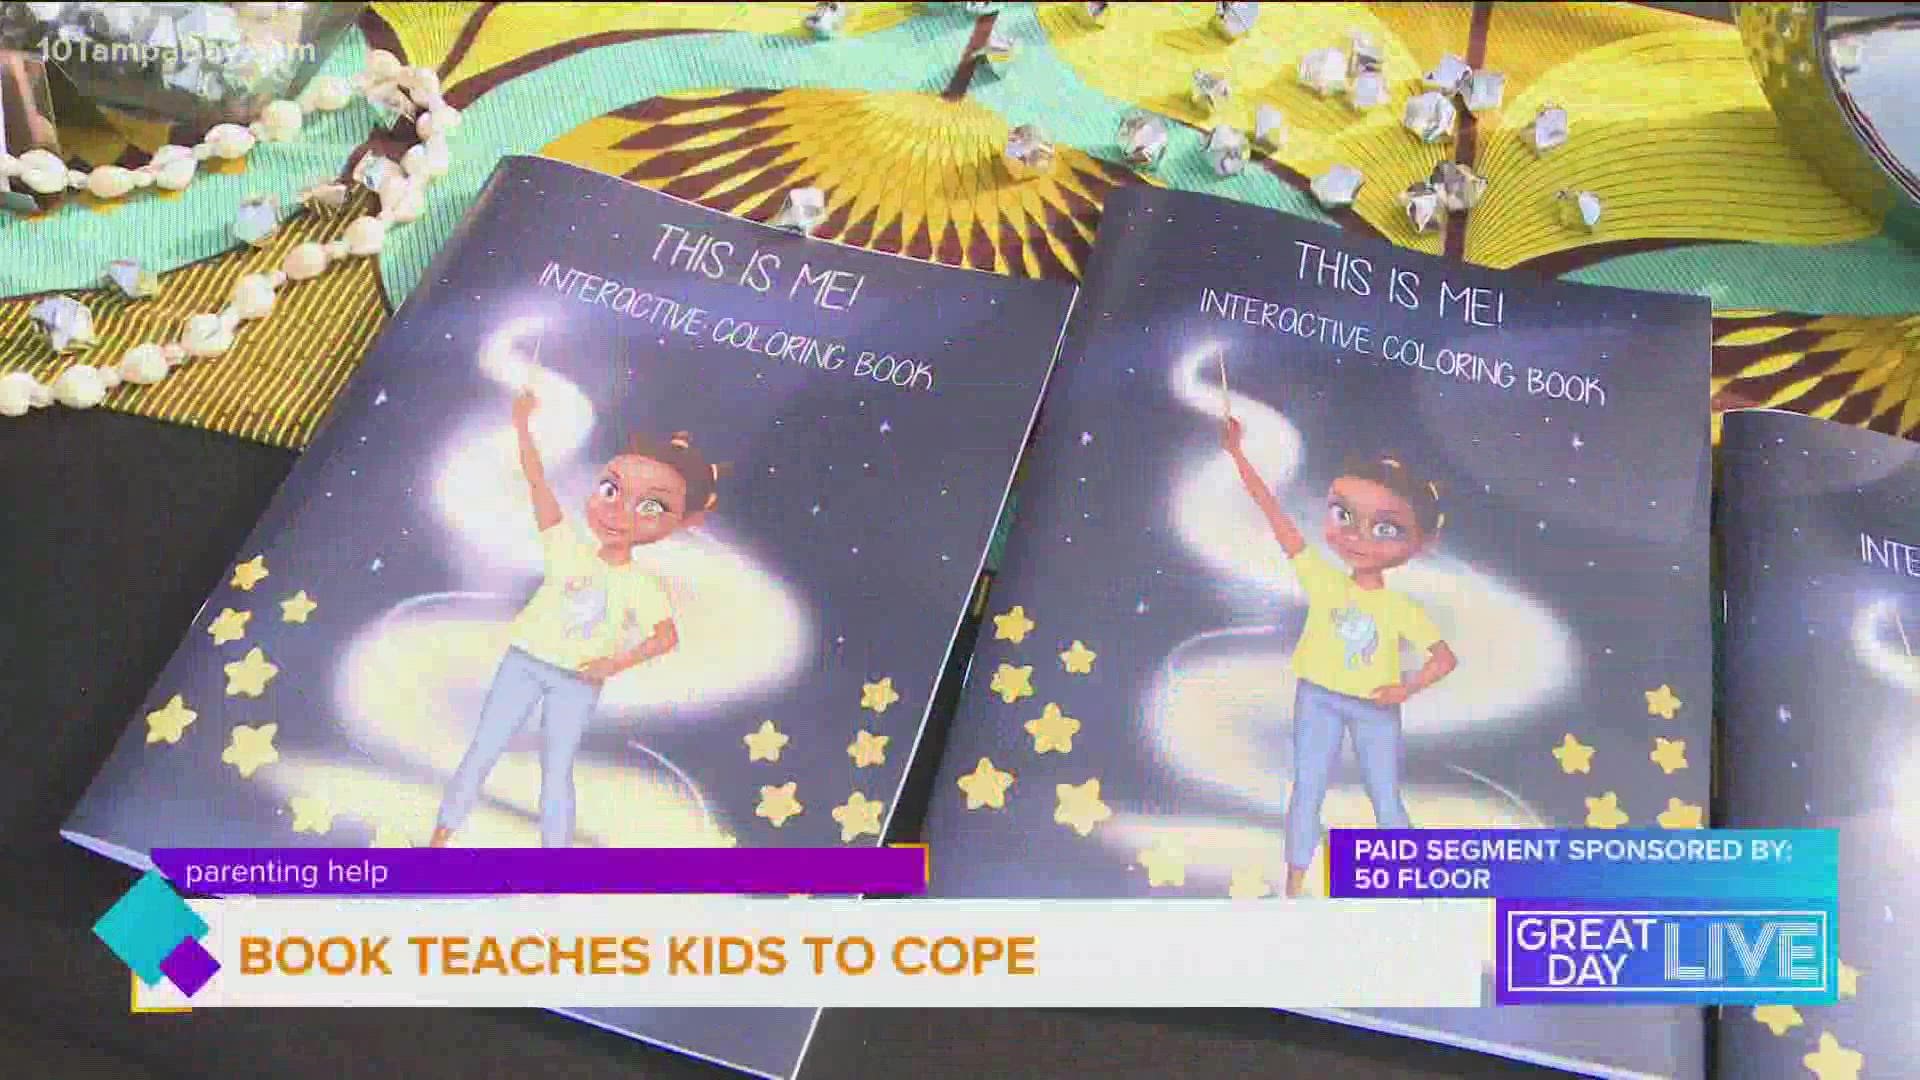 Children’s book author and life coach Lola B Morgan, joined us with details about her new book.